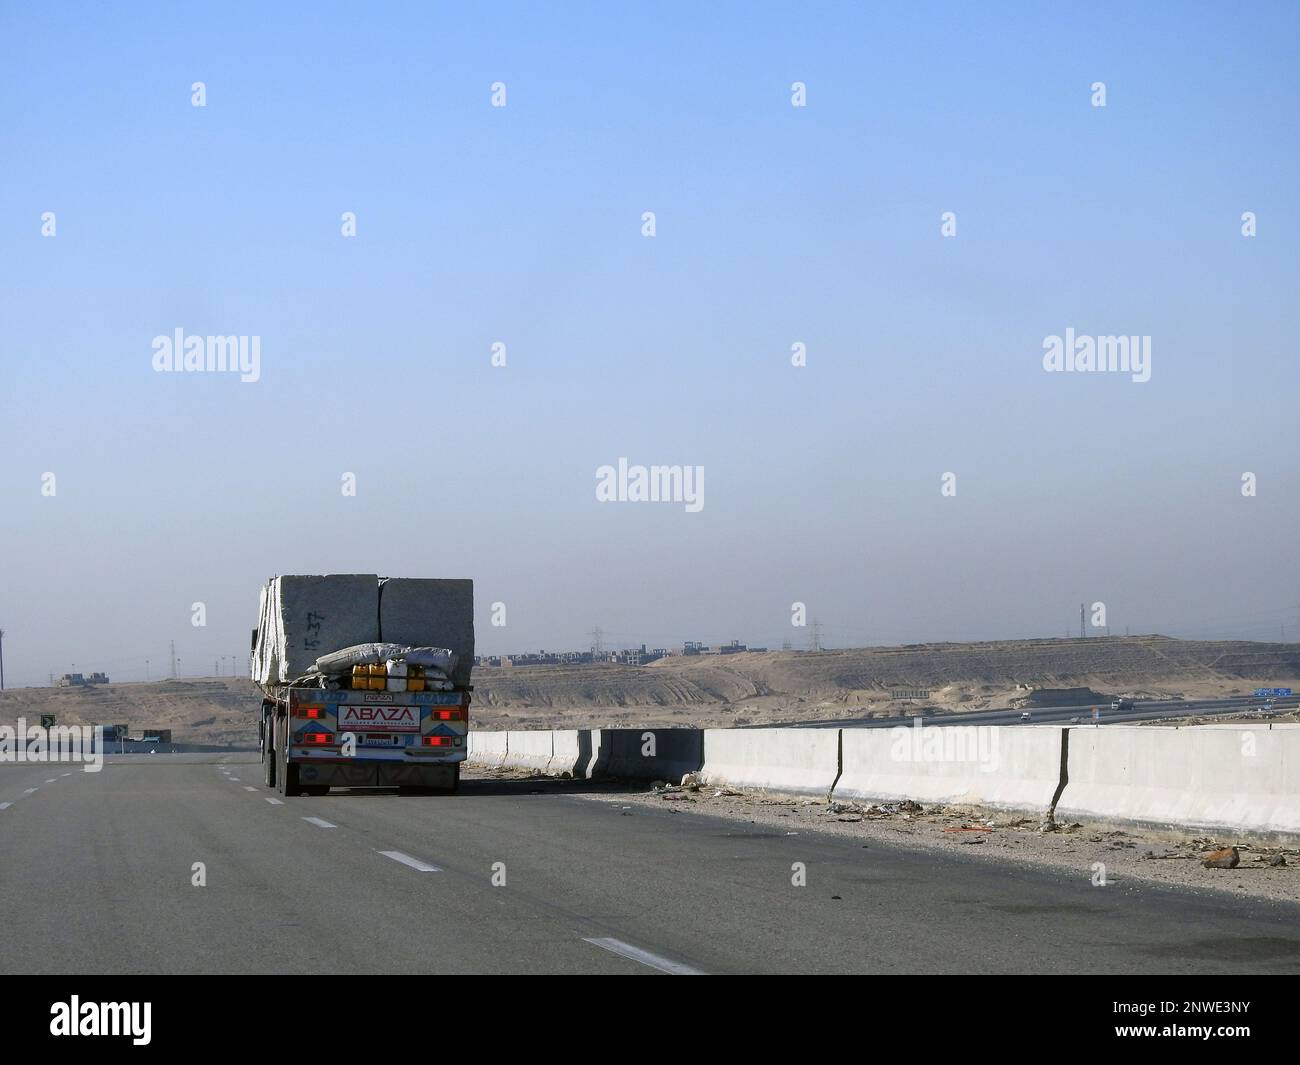 Giza, Egypt, January 26 2023: A big truck loaded with large blocks of stone, limestone, rocks taken from quarries in mountains being transferred on a Stock Photo